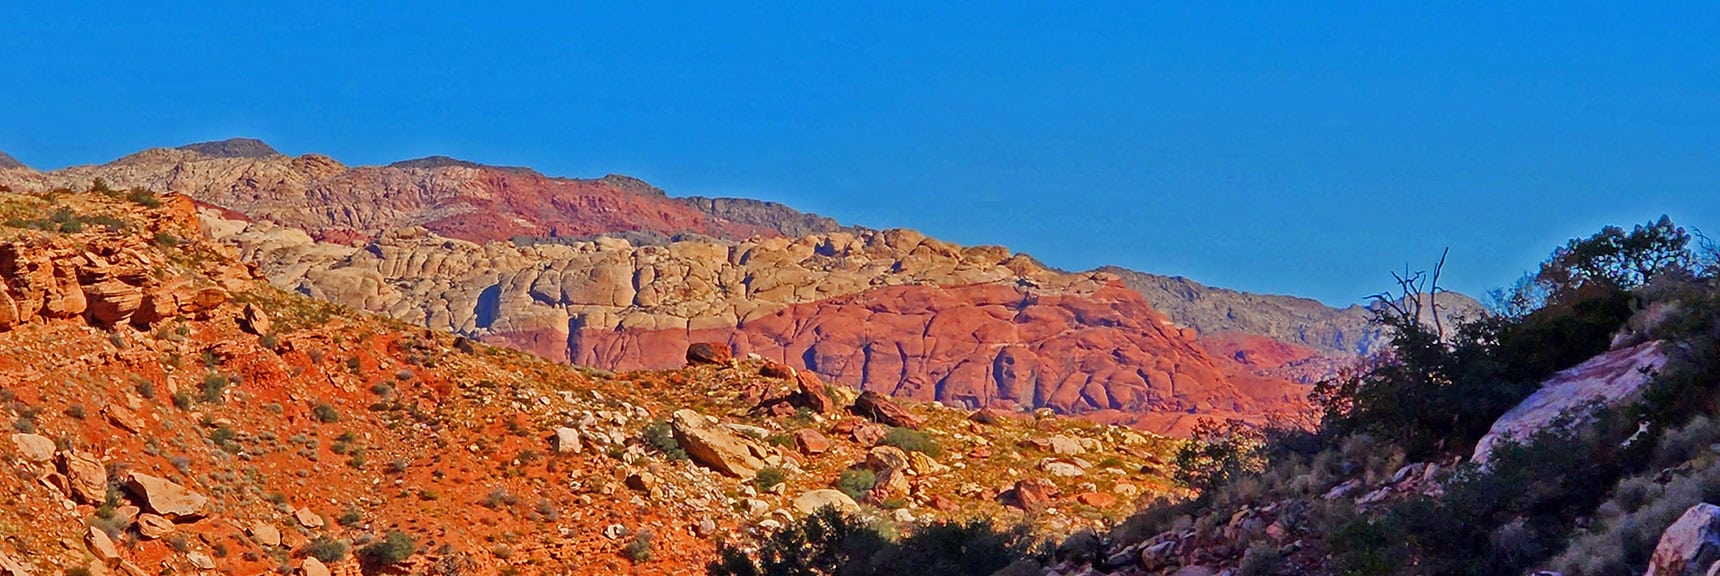 View to Calico Hills in Red Rock Canyon | Rock Climber Observations | Pine Creek Canyon | Rainbow Mountain Wilderness, Nevada